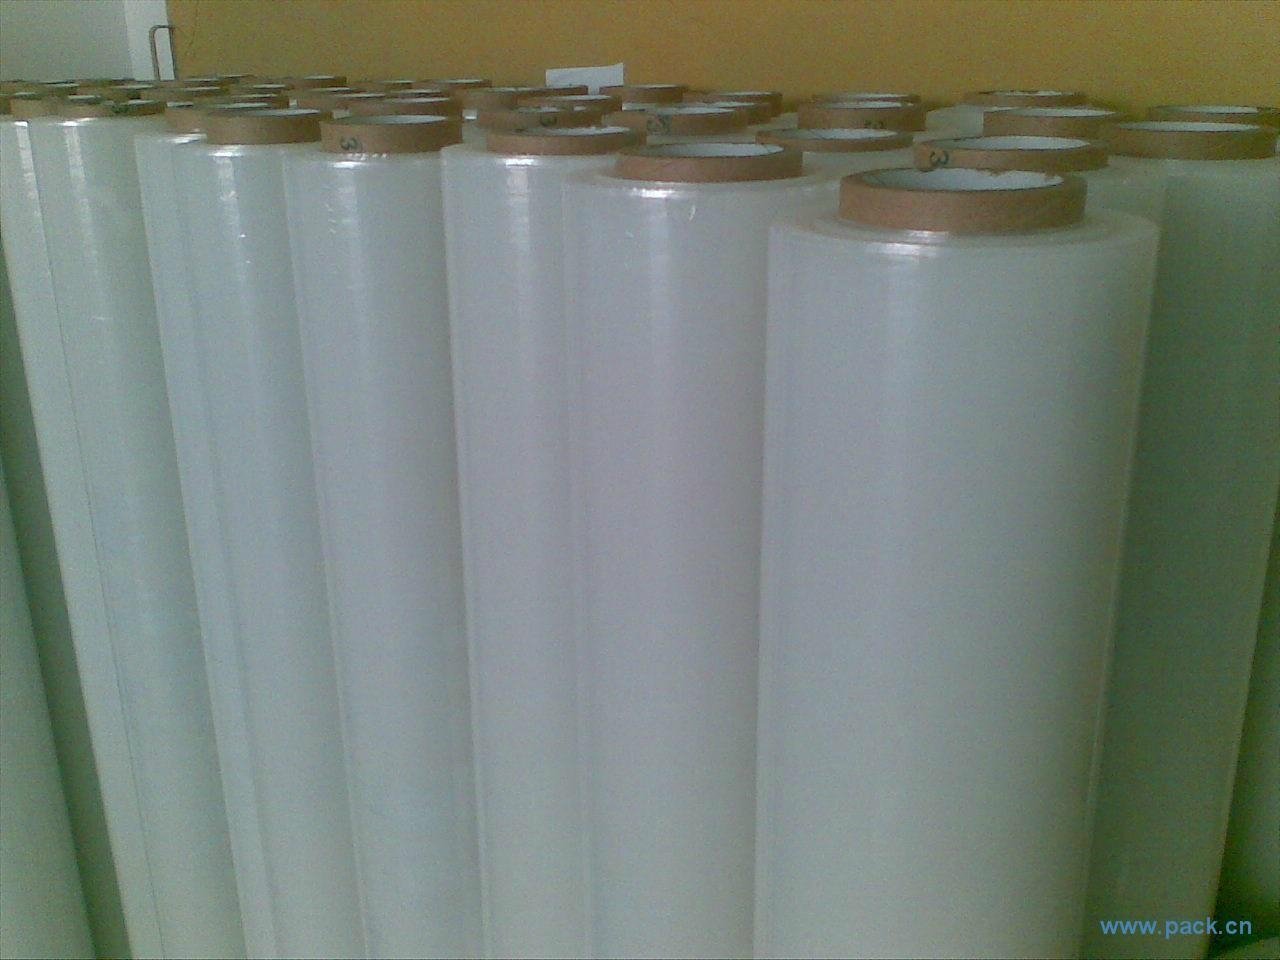 Professional Supplier of Protectiion Film 4